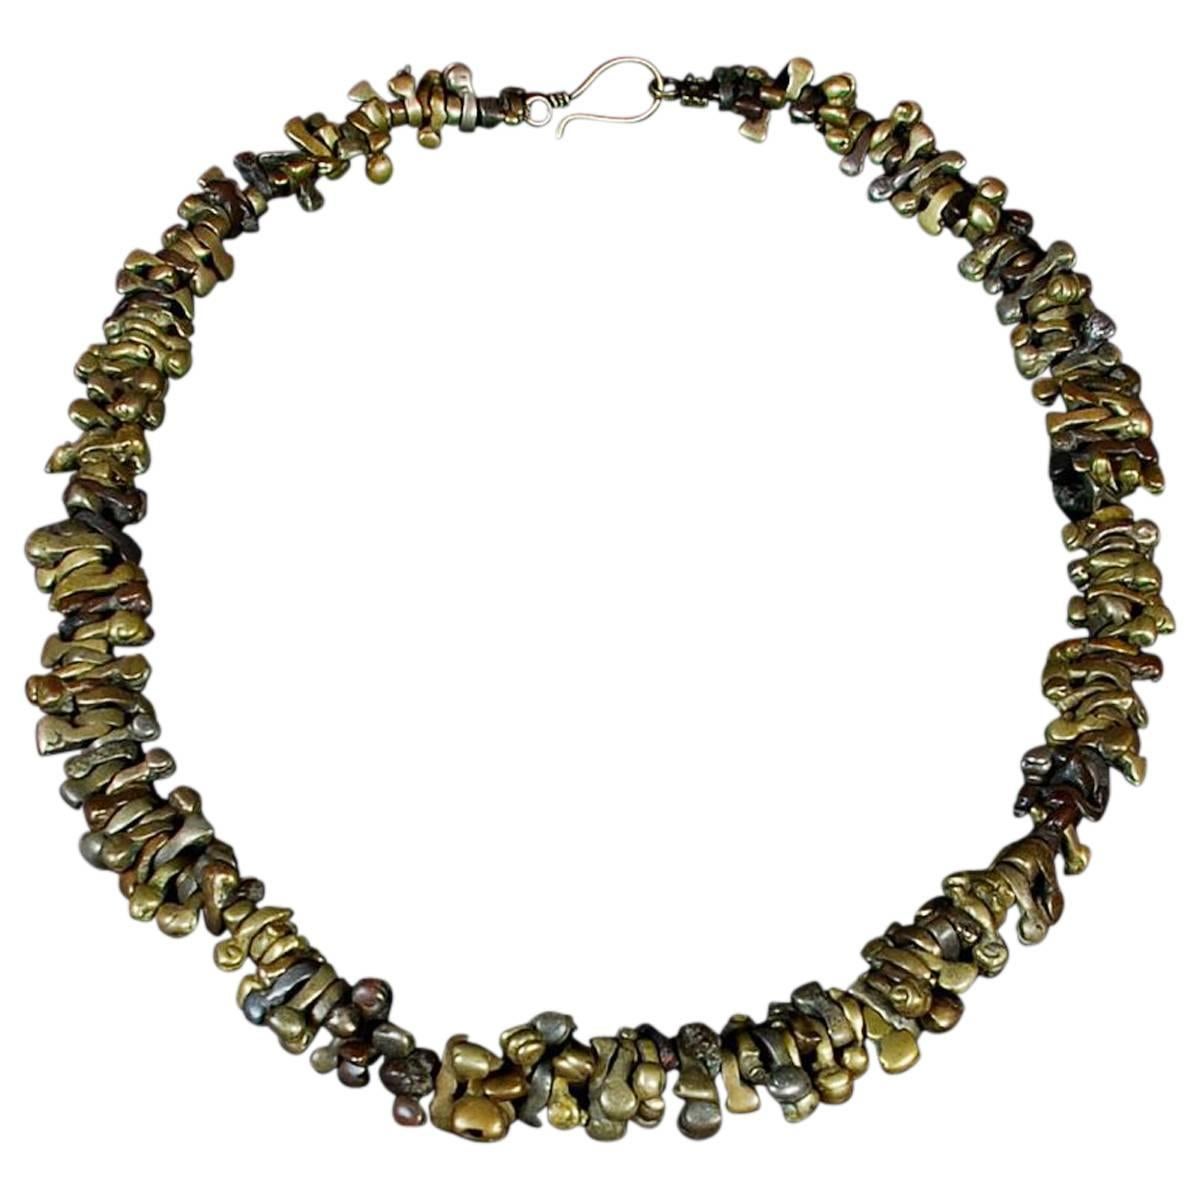 Bronze Necklace of 18th and 19th Igbo Bug Beads from Nigeria Africa Jewelry